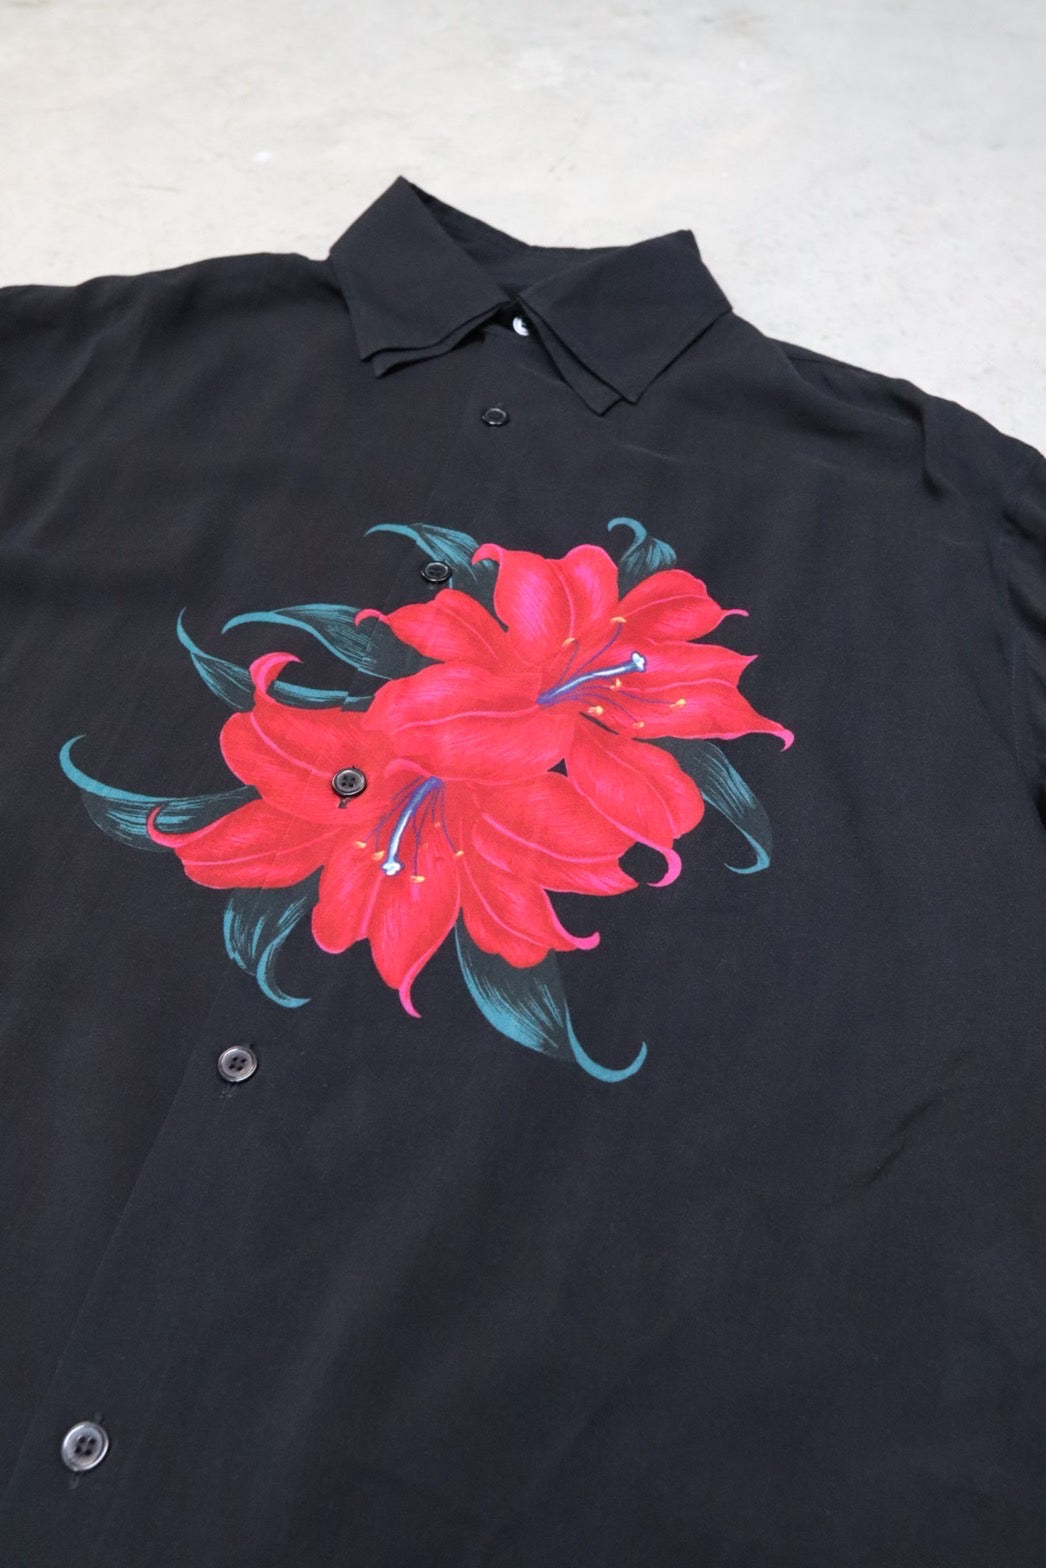 [Unknown Archive] Yohji Yamamoto Replica SS1987 Flower Printed Shirt- Size 3 Accepting Offer